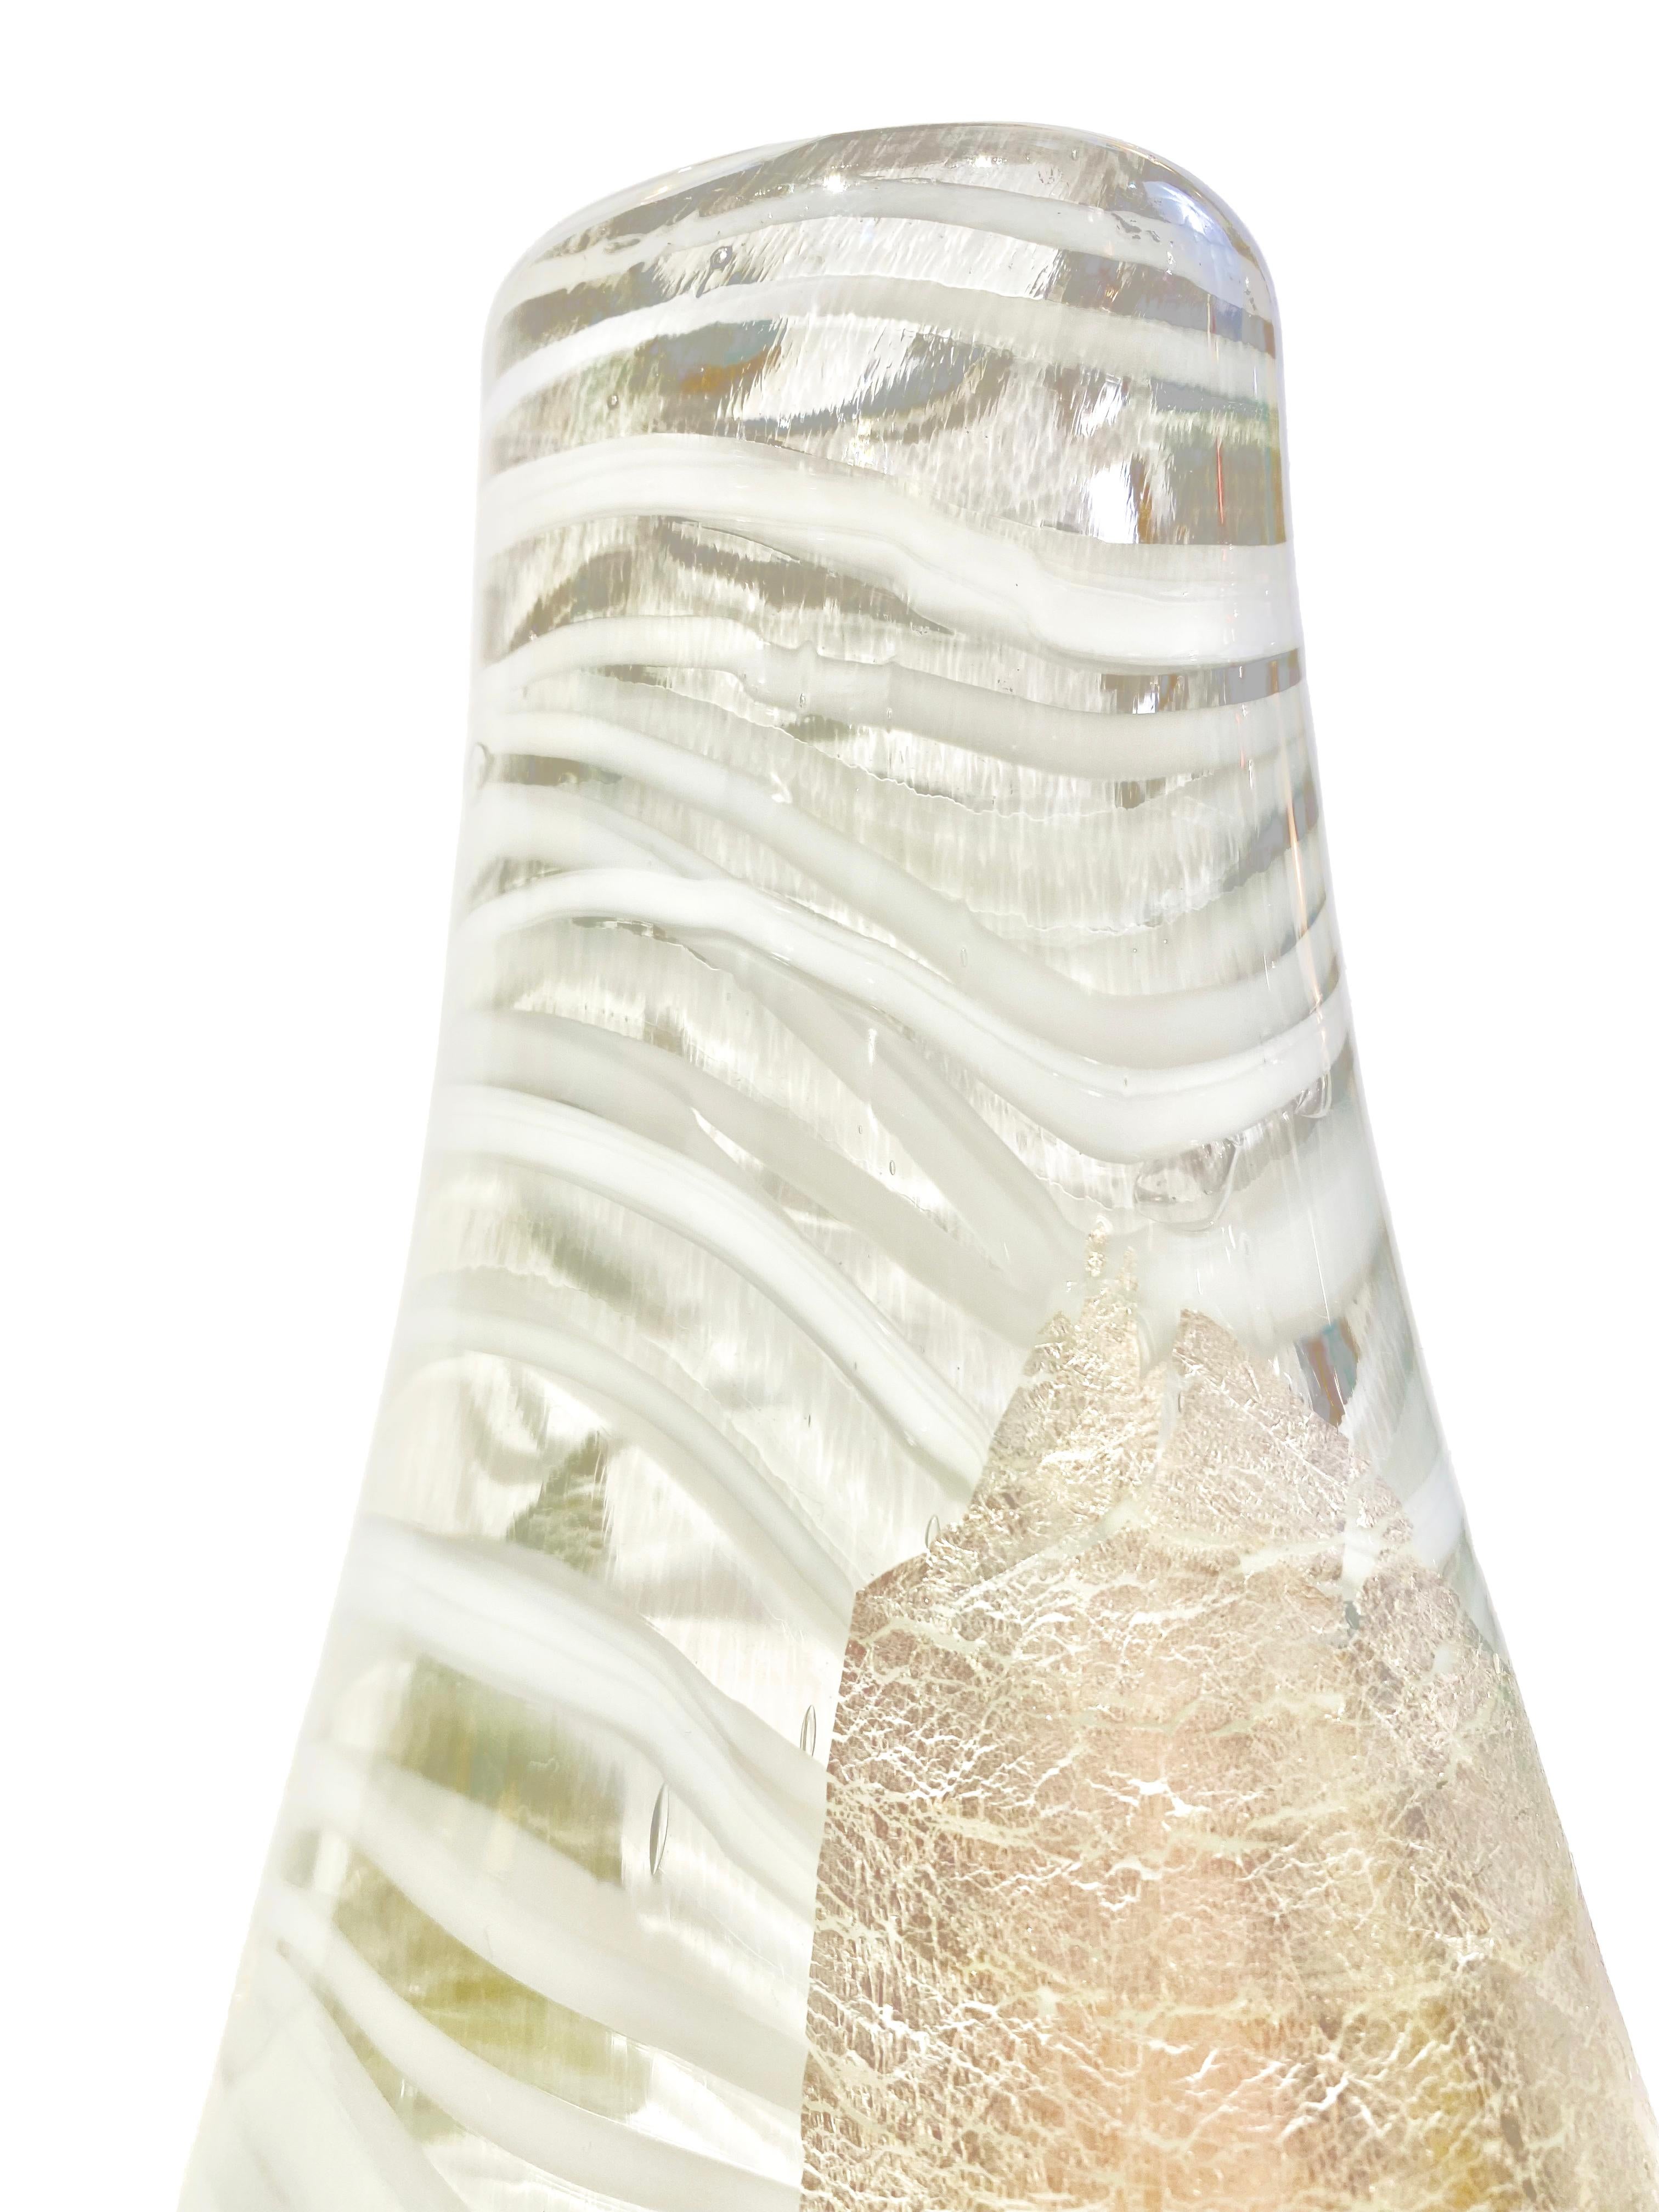 Hand-Crafted Italian Art Deco Style Silver Leaf White Clear Murano Glass Sculpture Vase For Sale